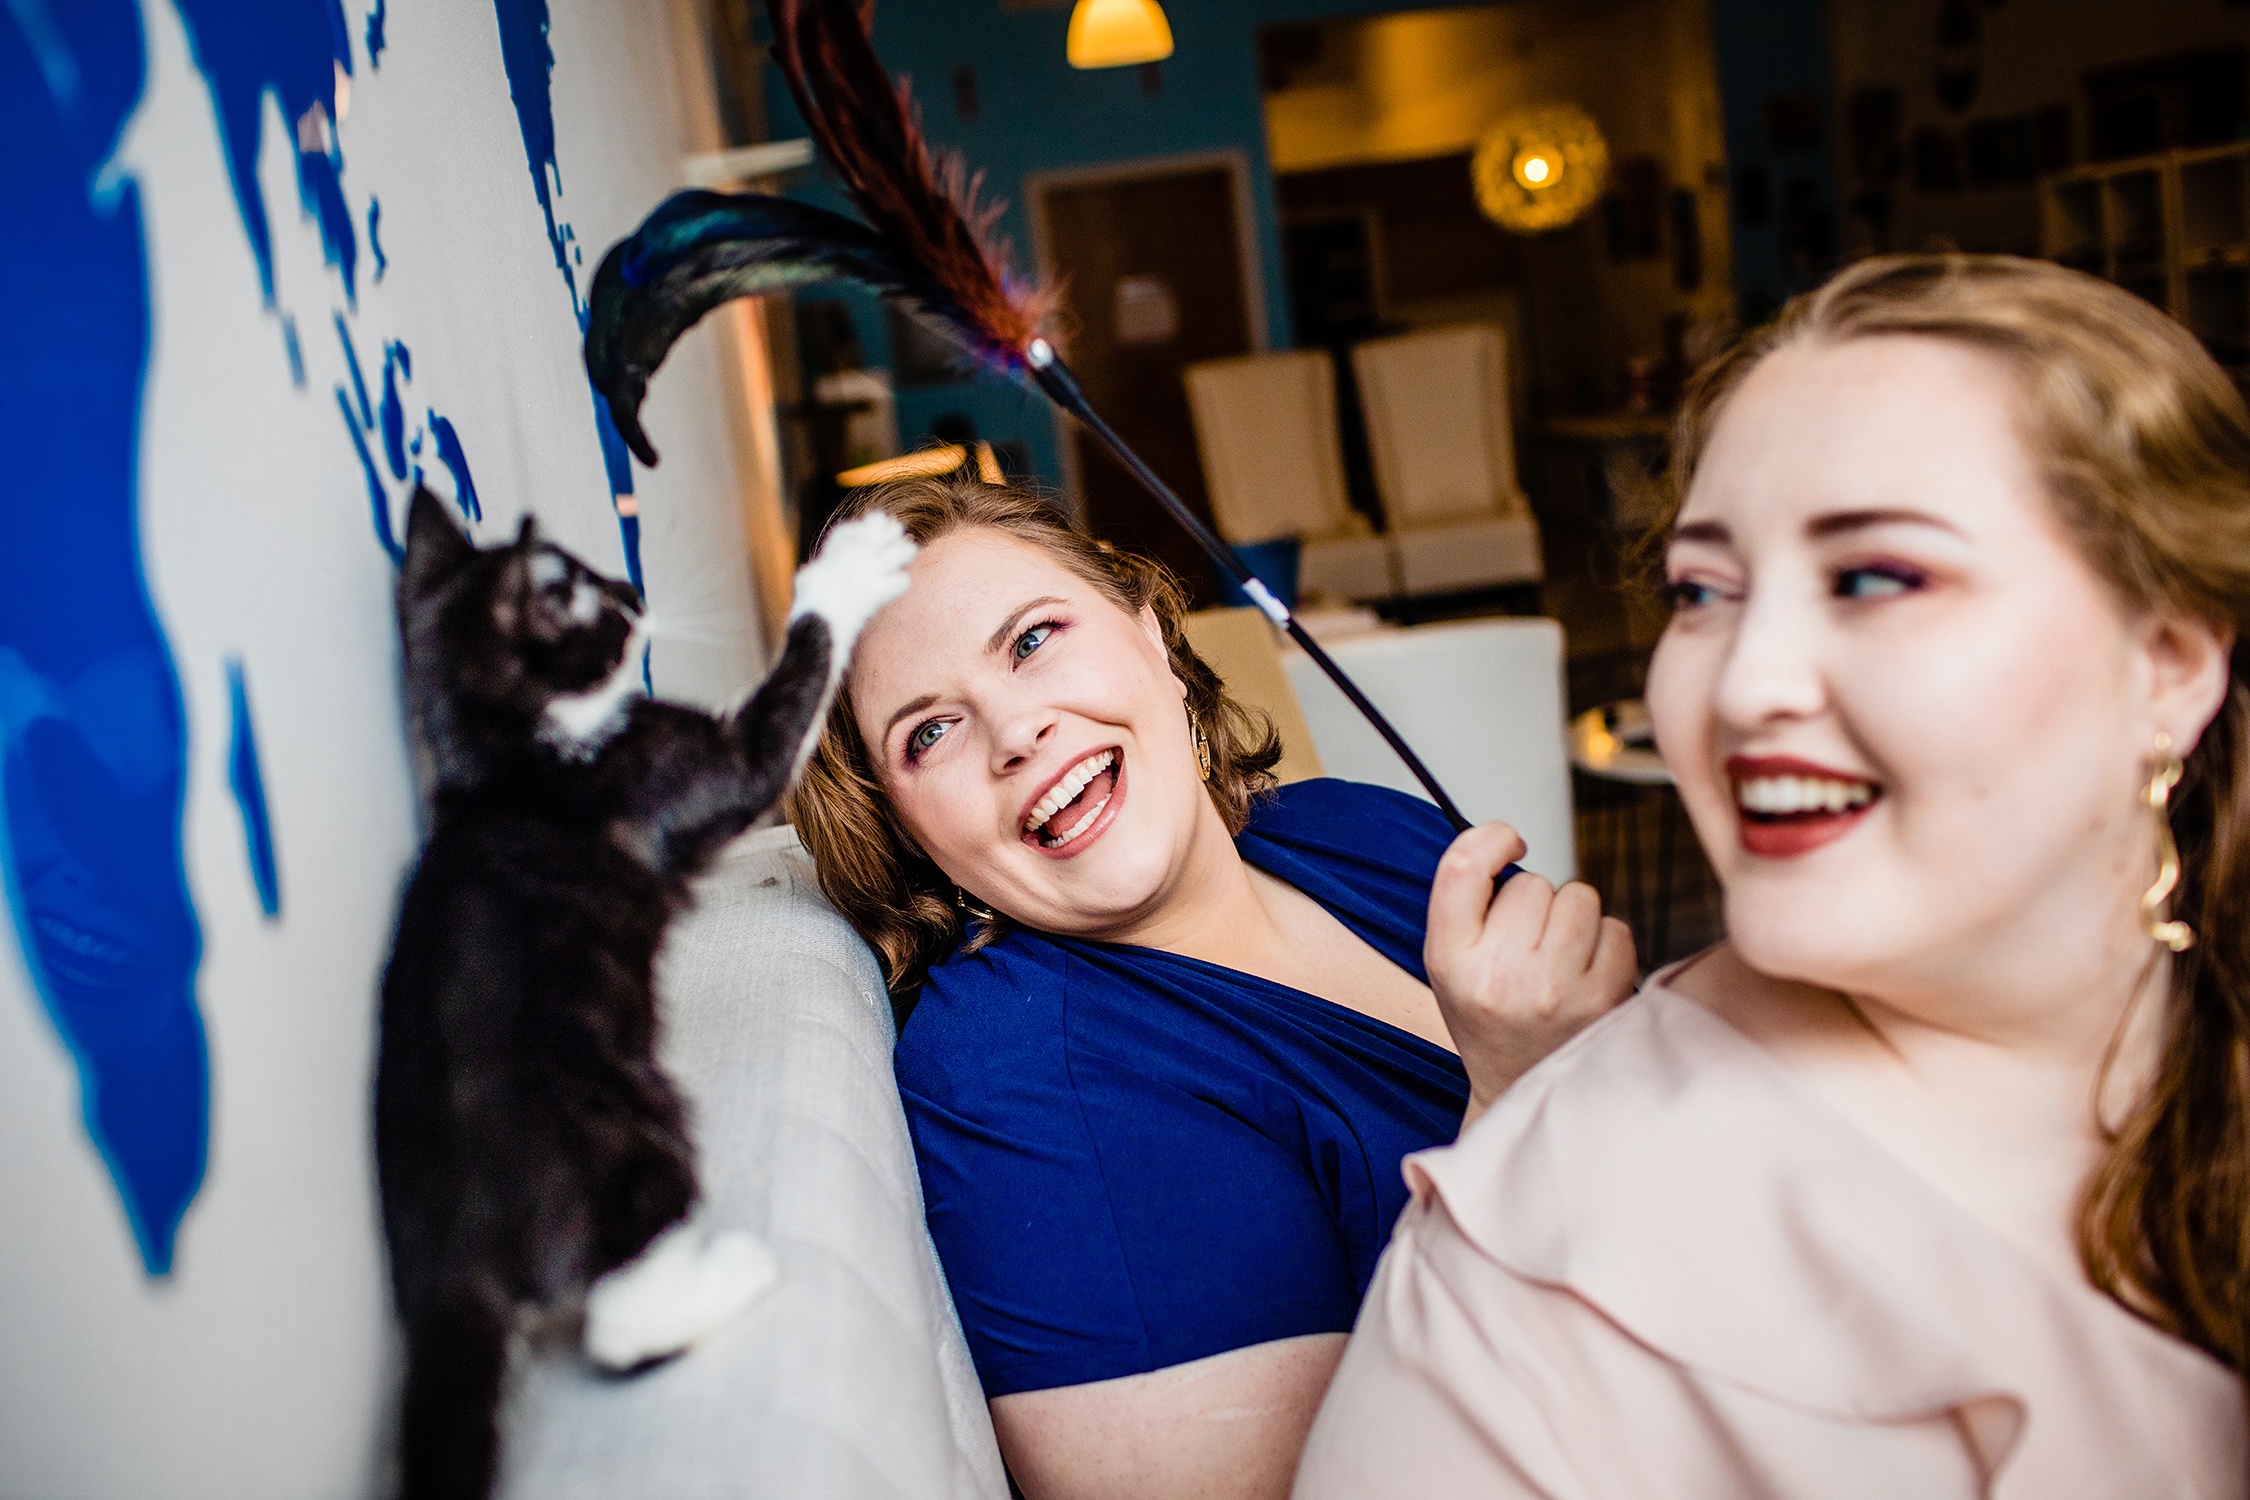 A couple plays with kittens during a cat cafe engagement session in Chicago.